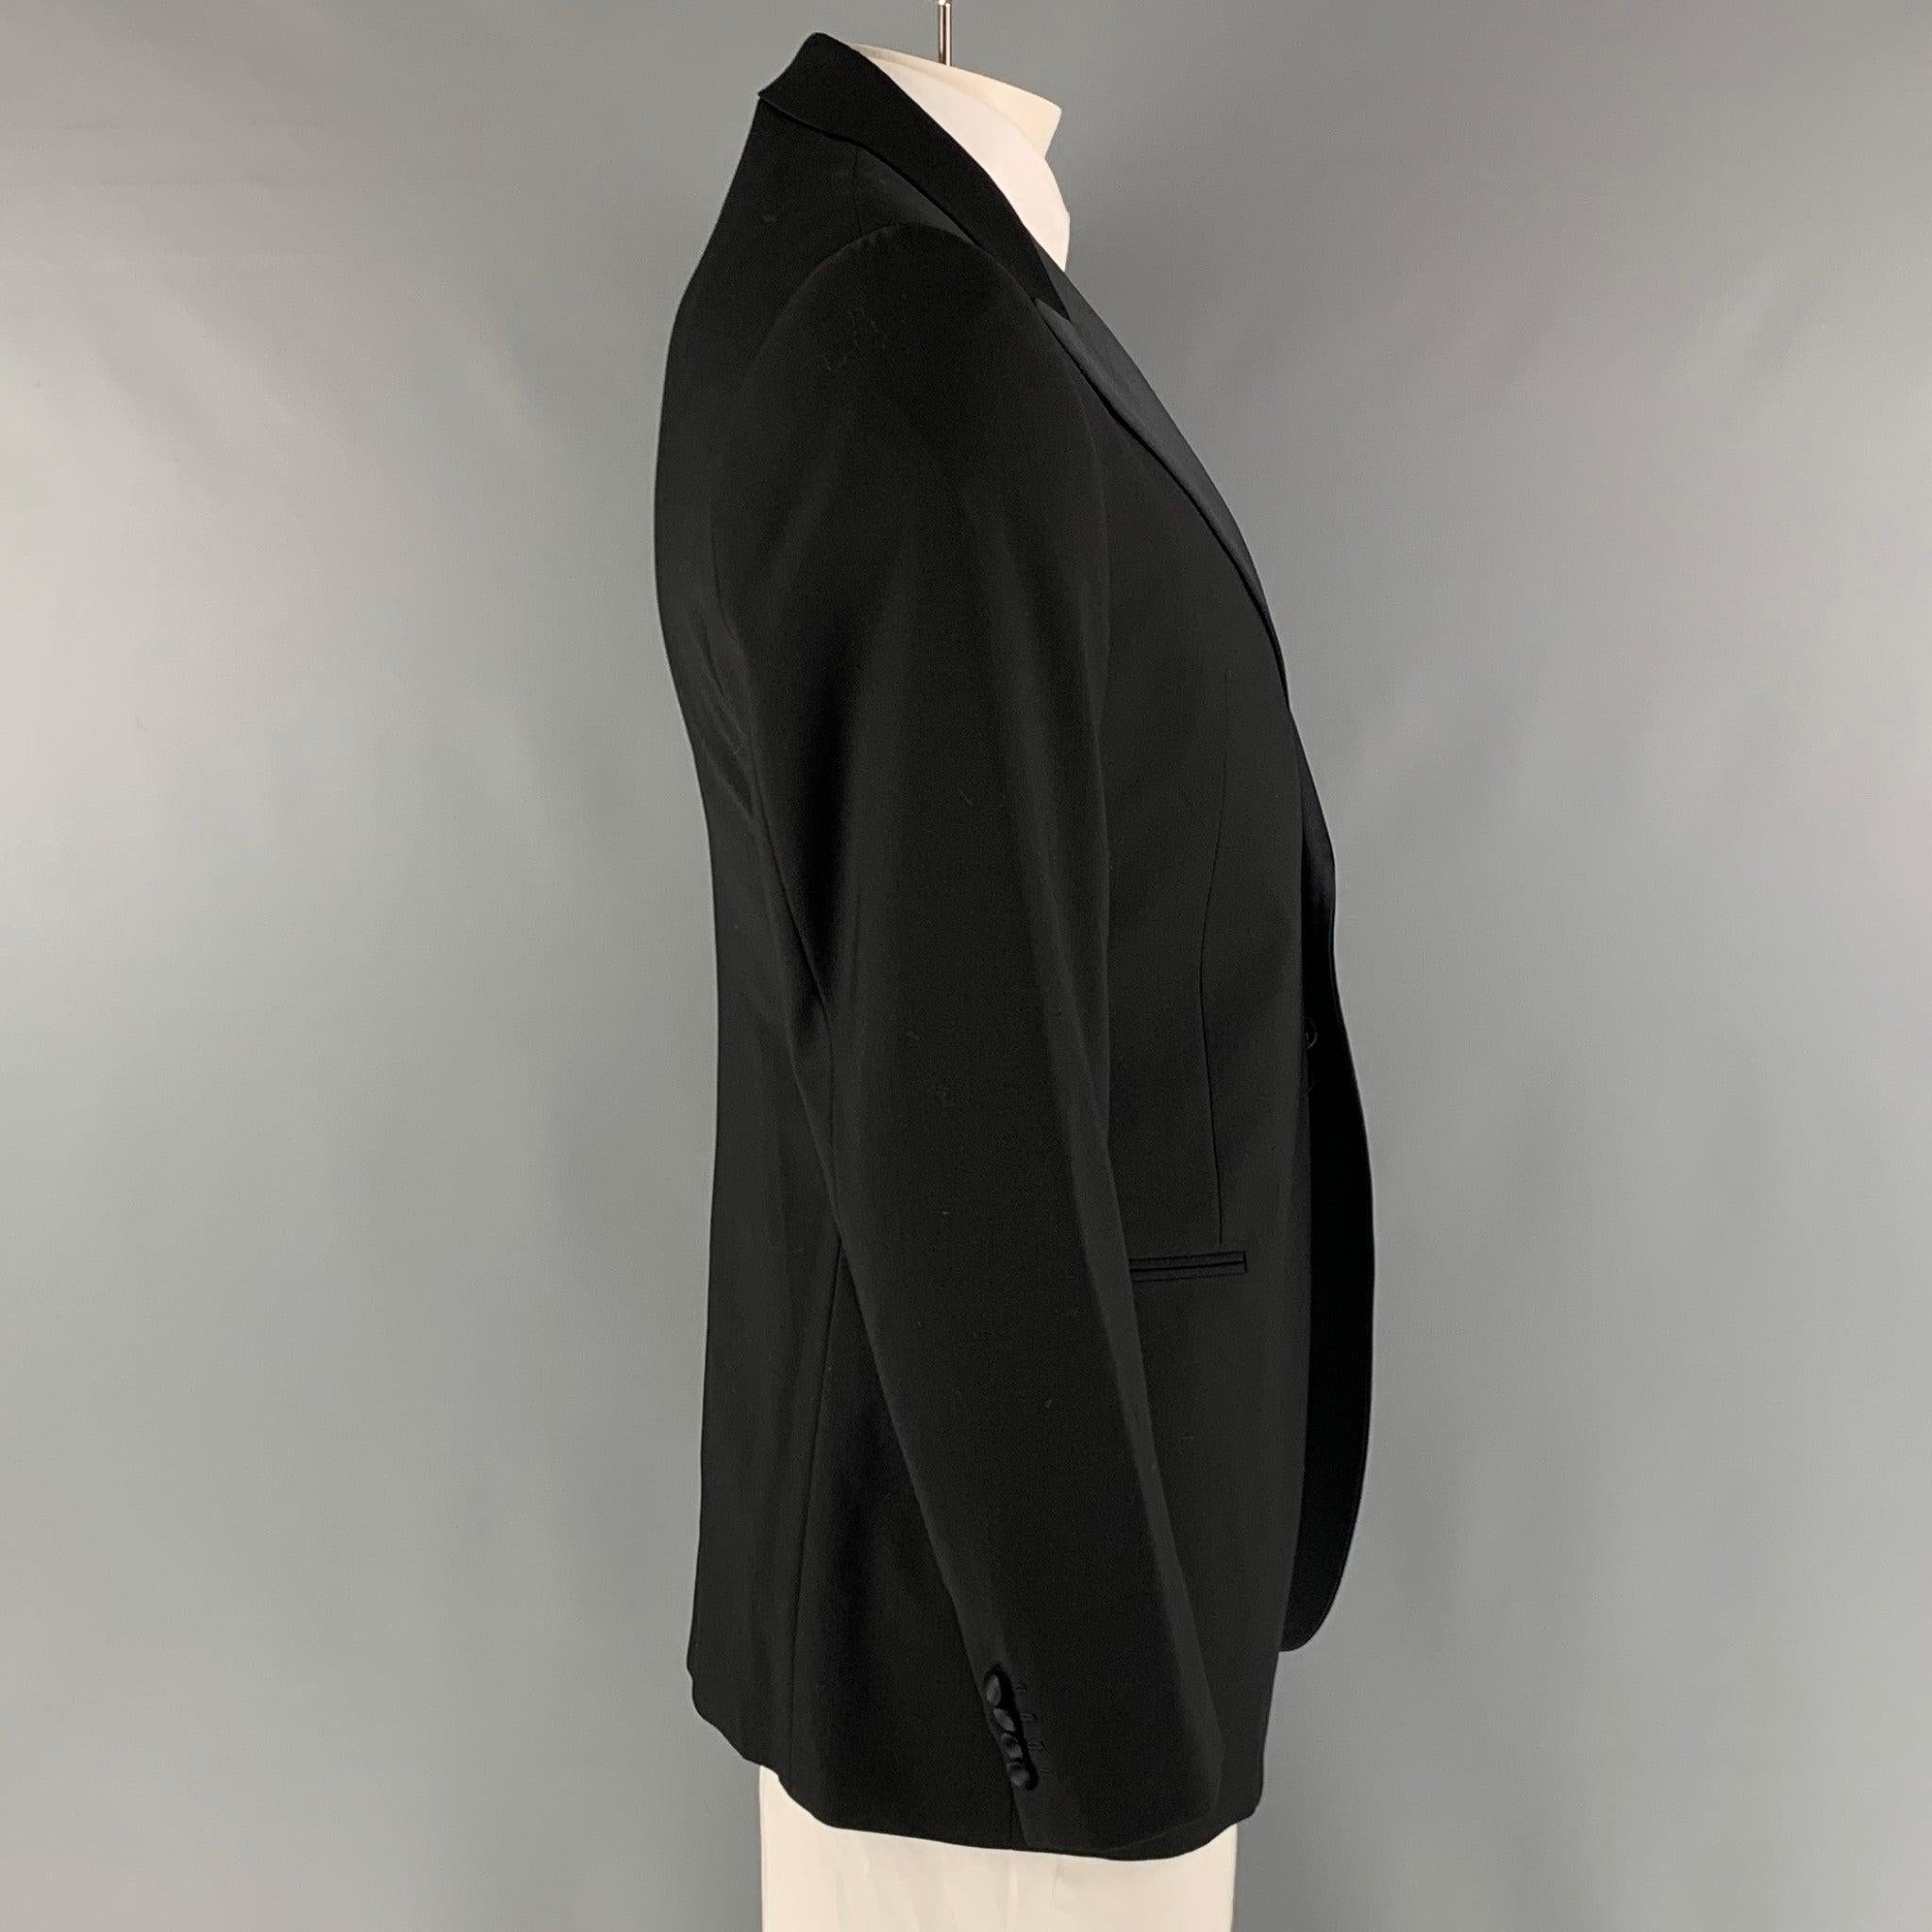 EMPORIO ARMANI tuxedo sport coat comes in a black wool woven material with a full liner featuring a peak lapel, welt pockets, and a single button closure. Made in Italy. Excellent Pre-Owned Condition.  

Marked:   52 

Measurements: 
 
Shoulder: